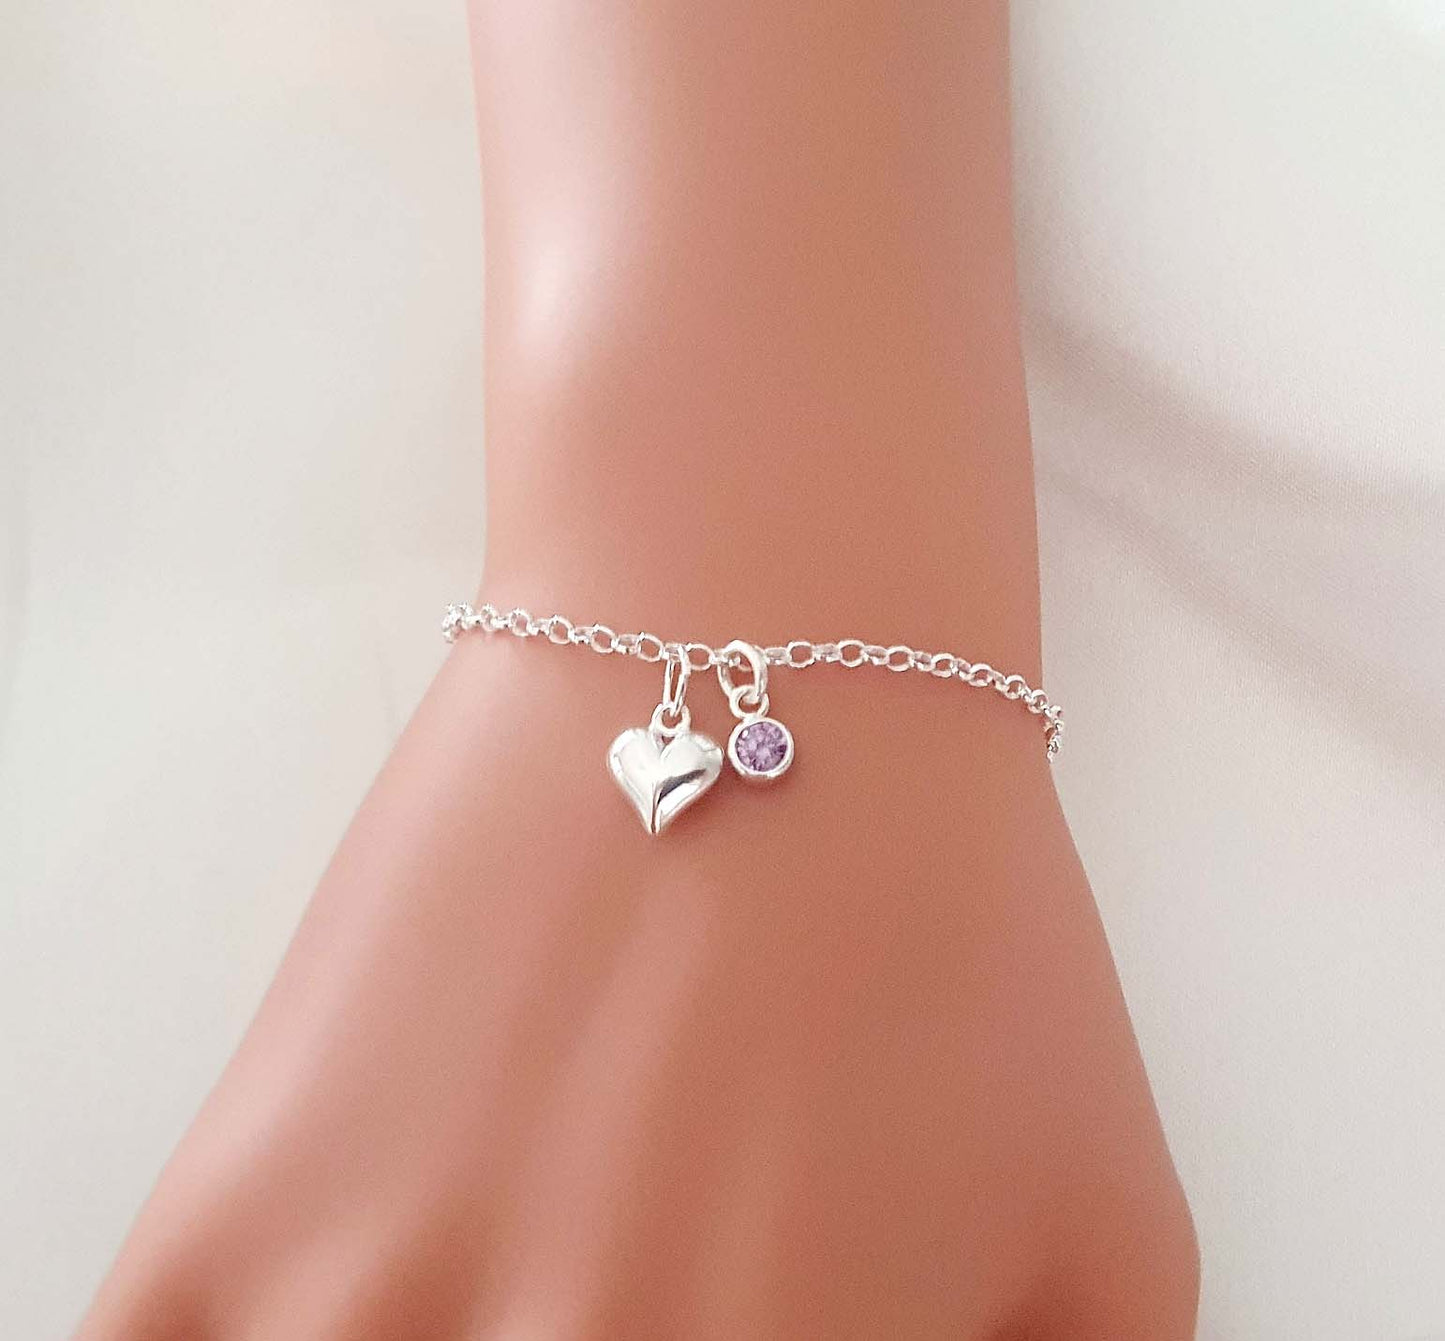 Auntie Puffy Heart Bracelet with Birthstone in Sterling Silver 925, Personalised Gift